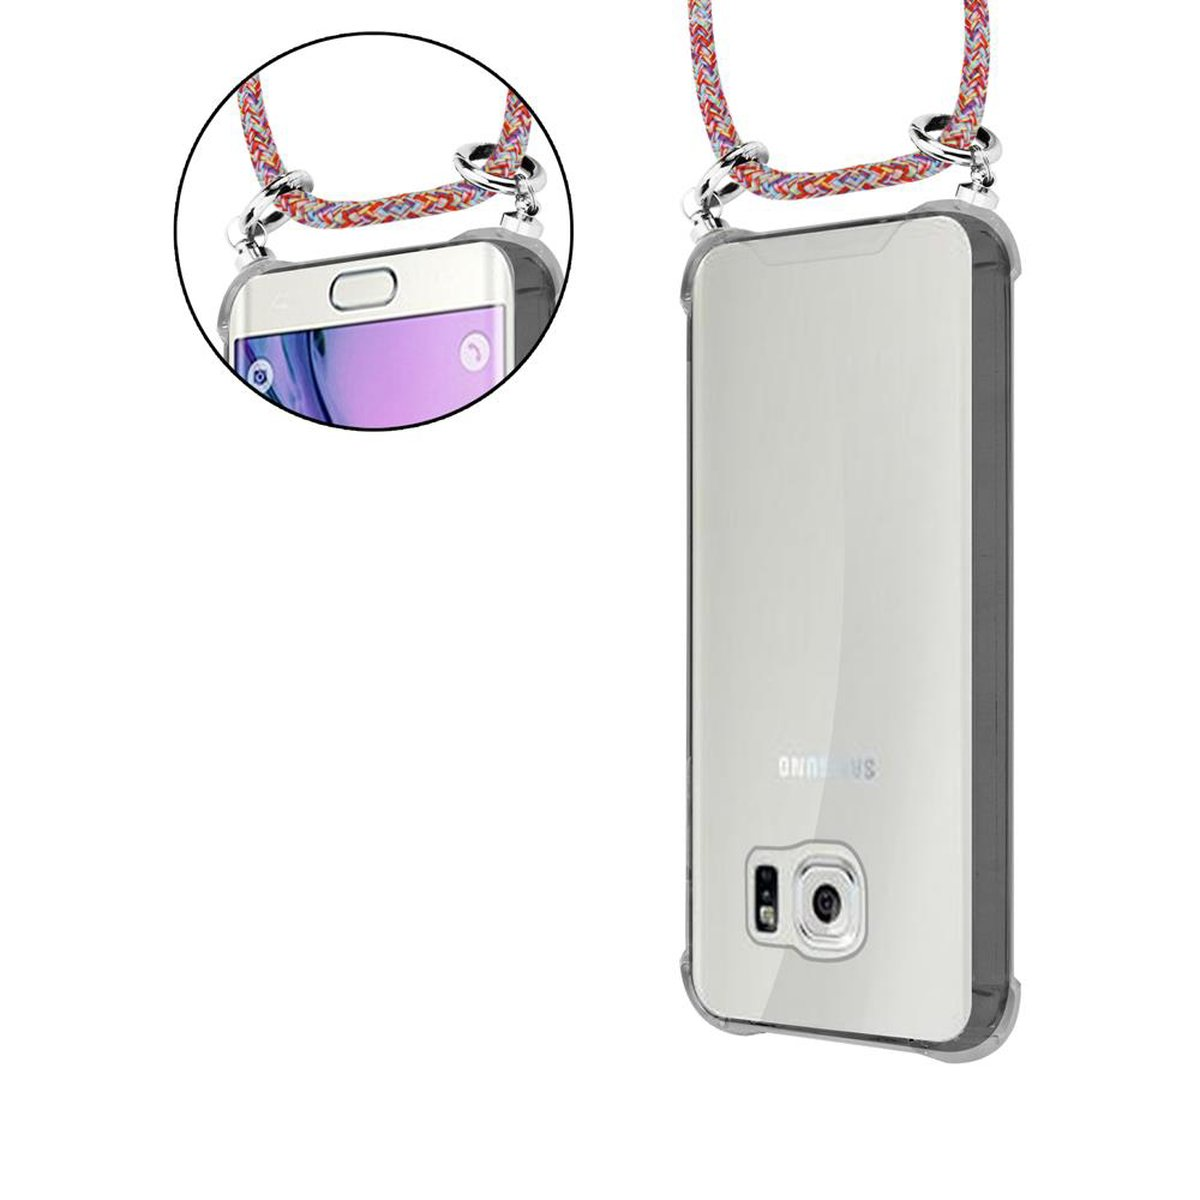 CADORABO Handy Kette mit Samsung, Silber Backcover, Kordel COLORFUL Hülle, PARROT Galaxy Band abnehmbarer und Ringen, S6